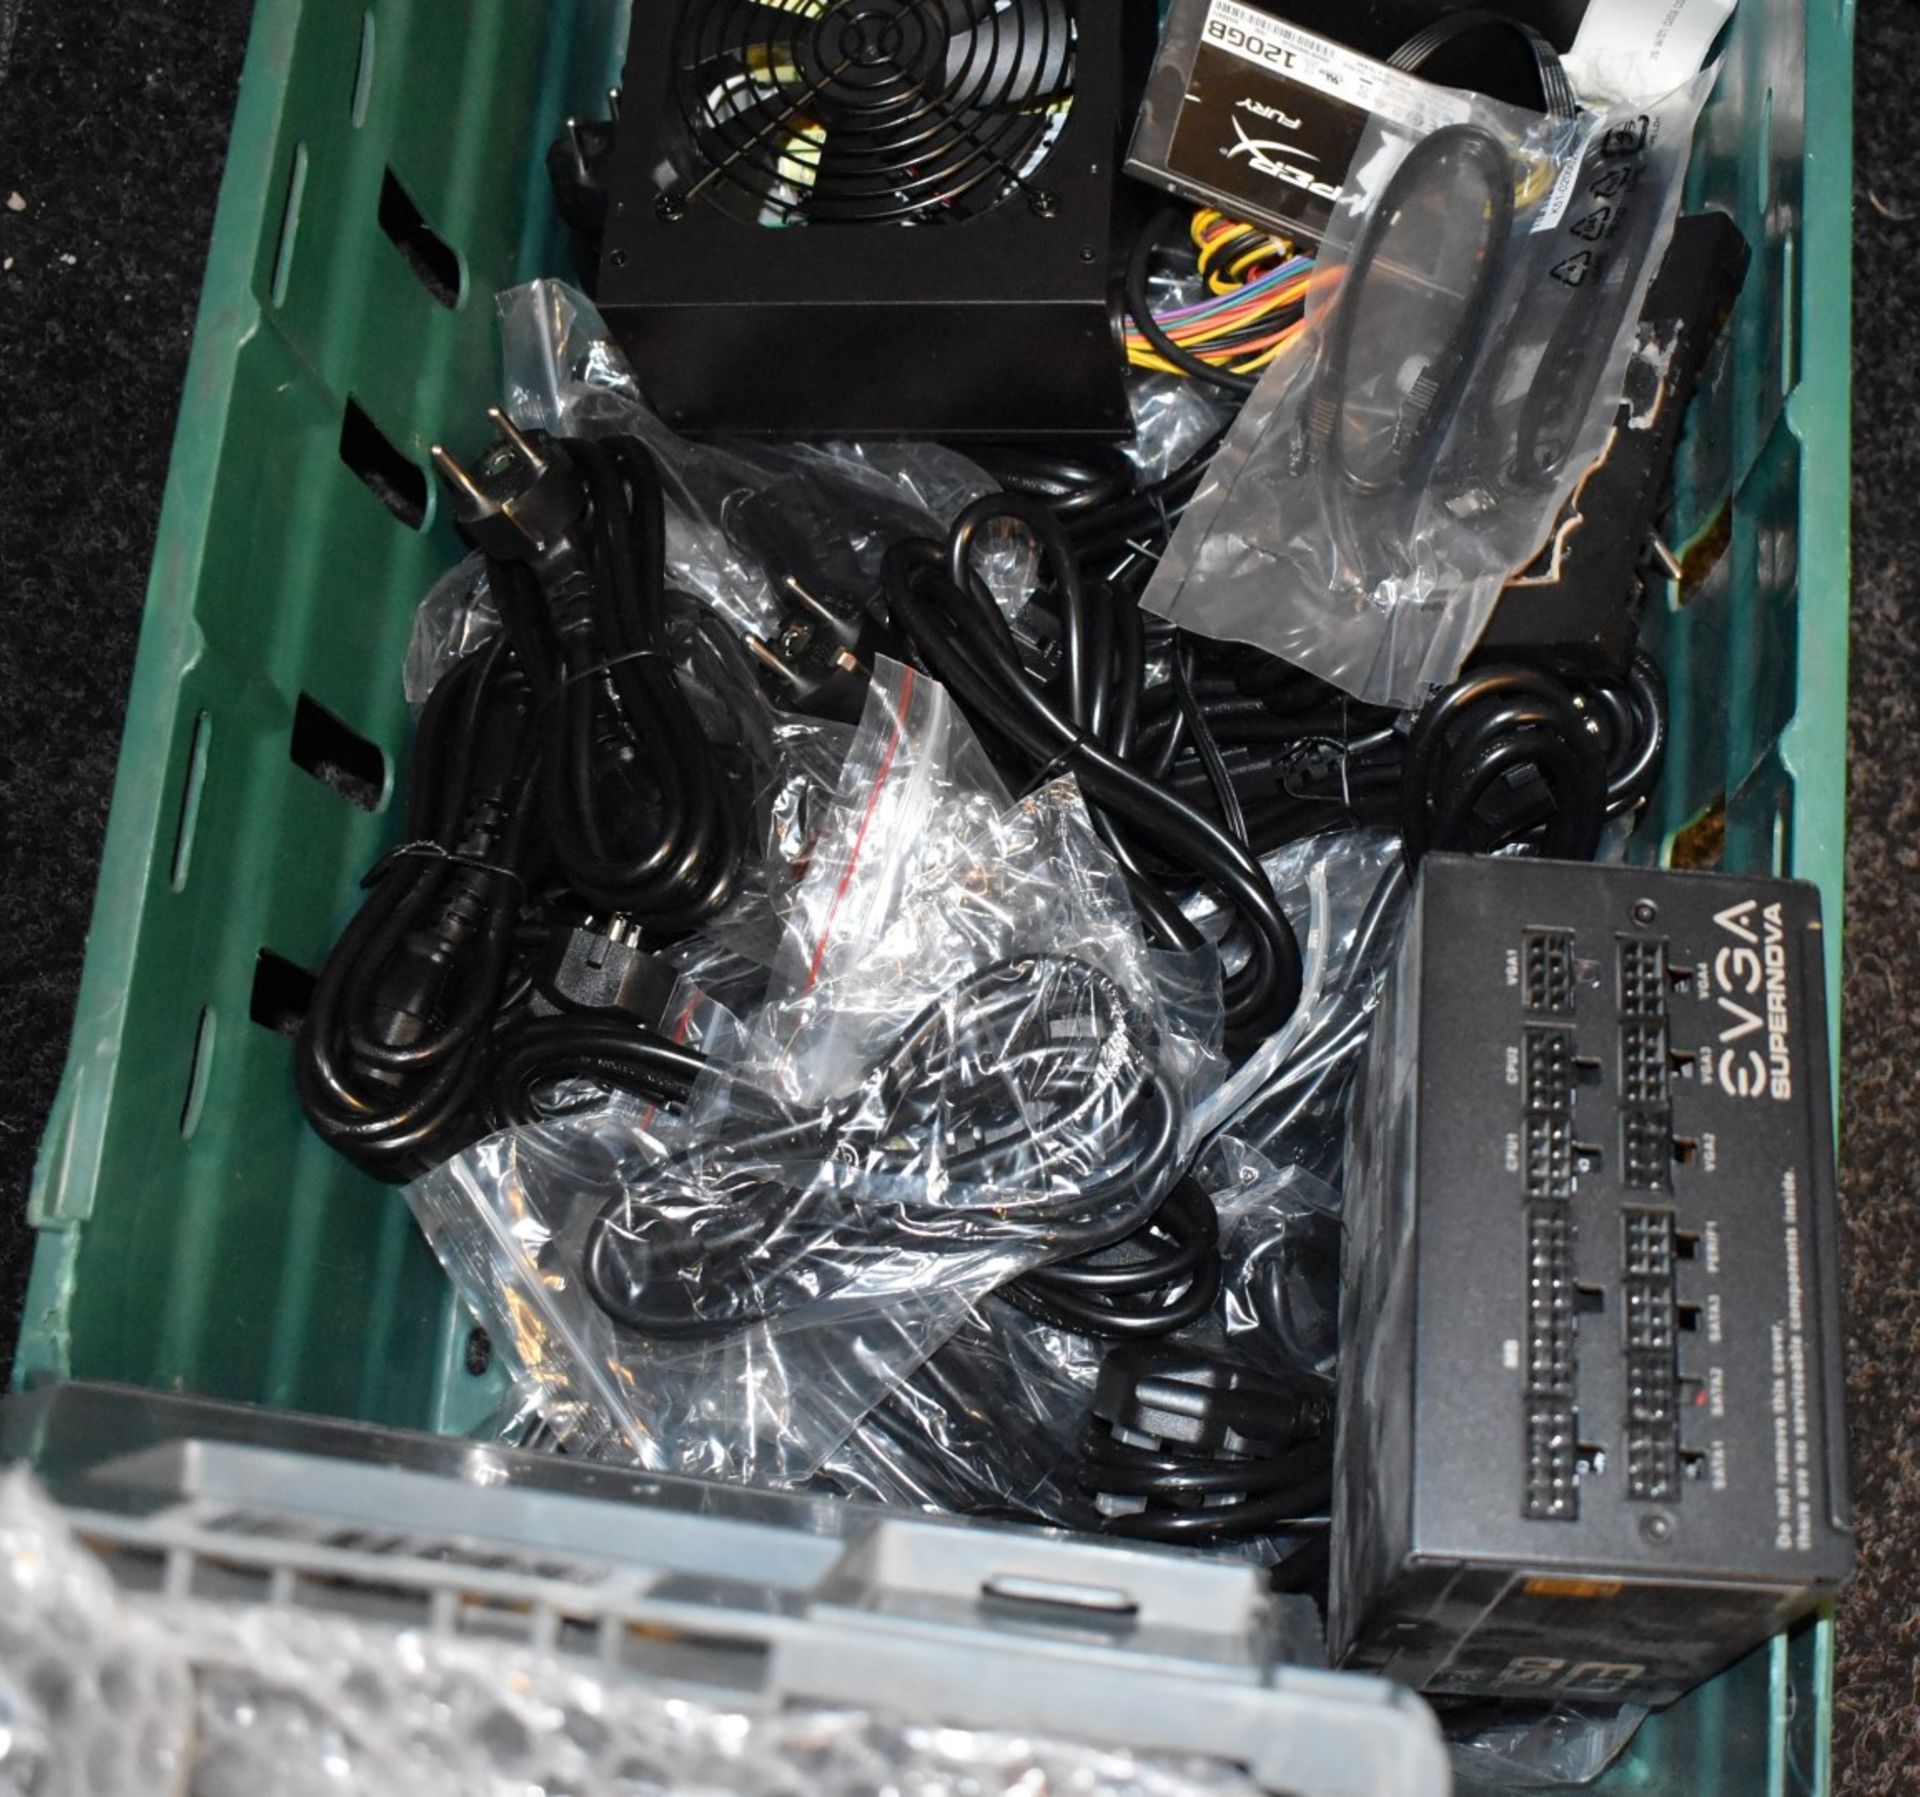 1 x Assorted Collection of Computer Equipment - Customer Returns - Trolley Not Included - Image 11 of 18